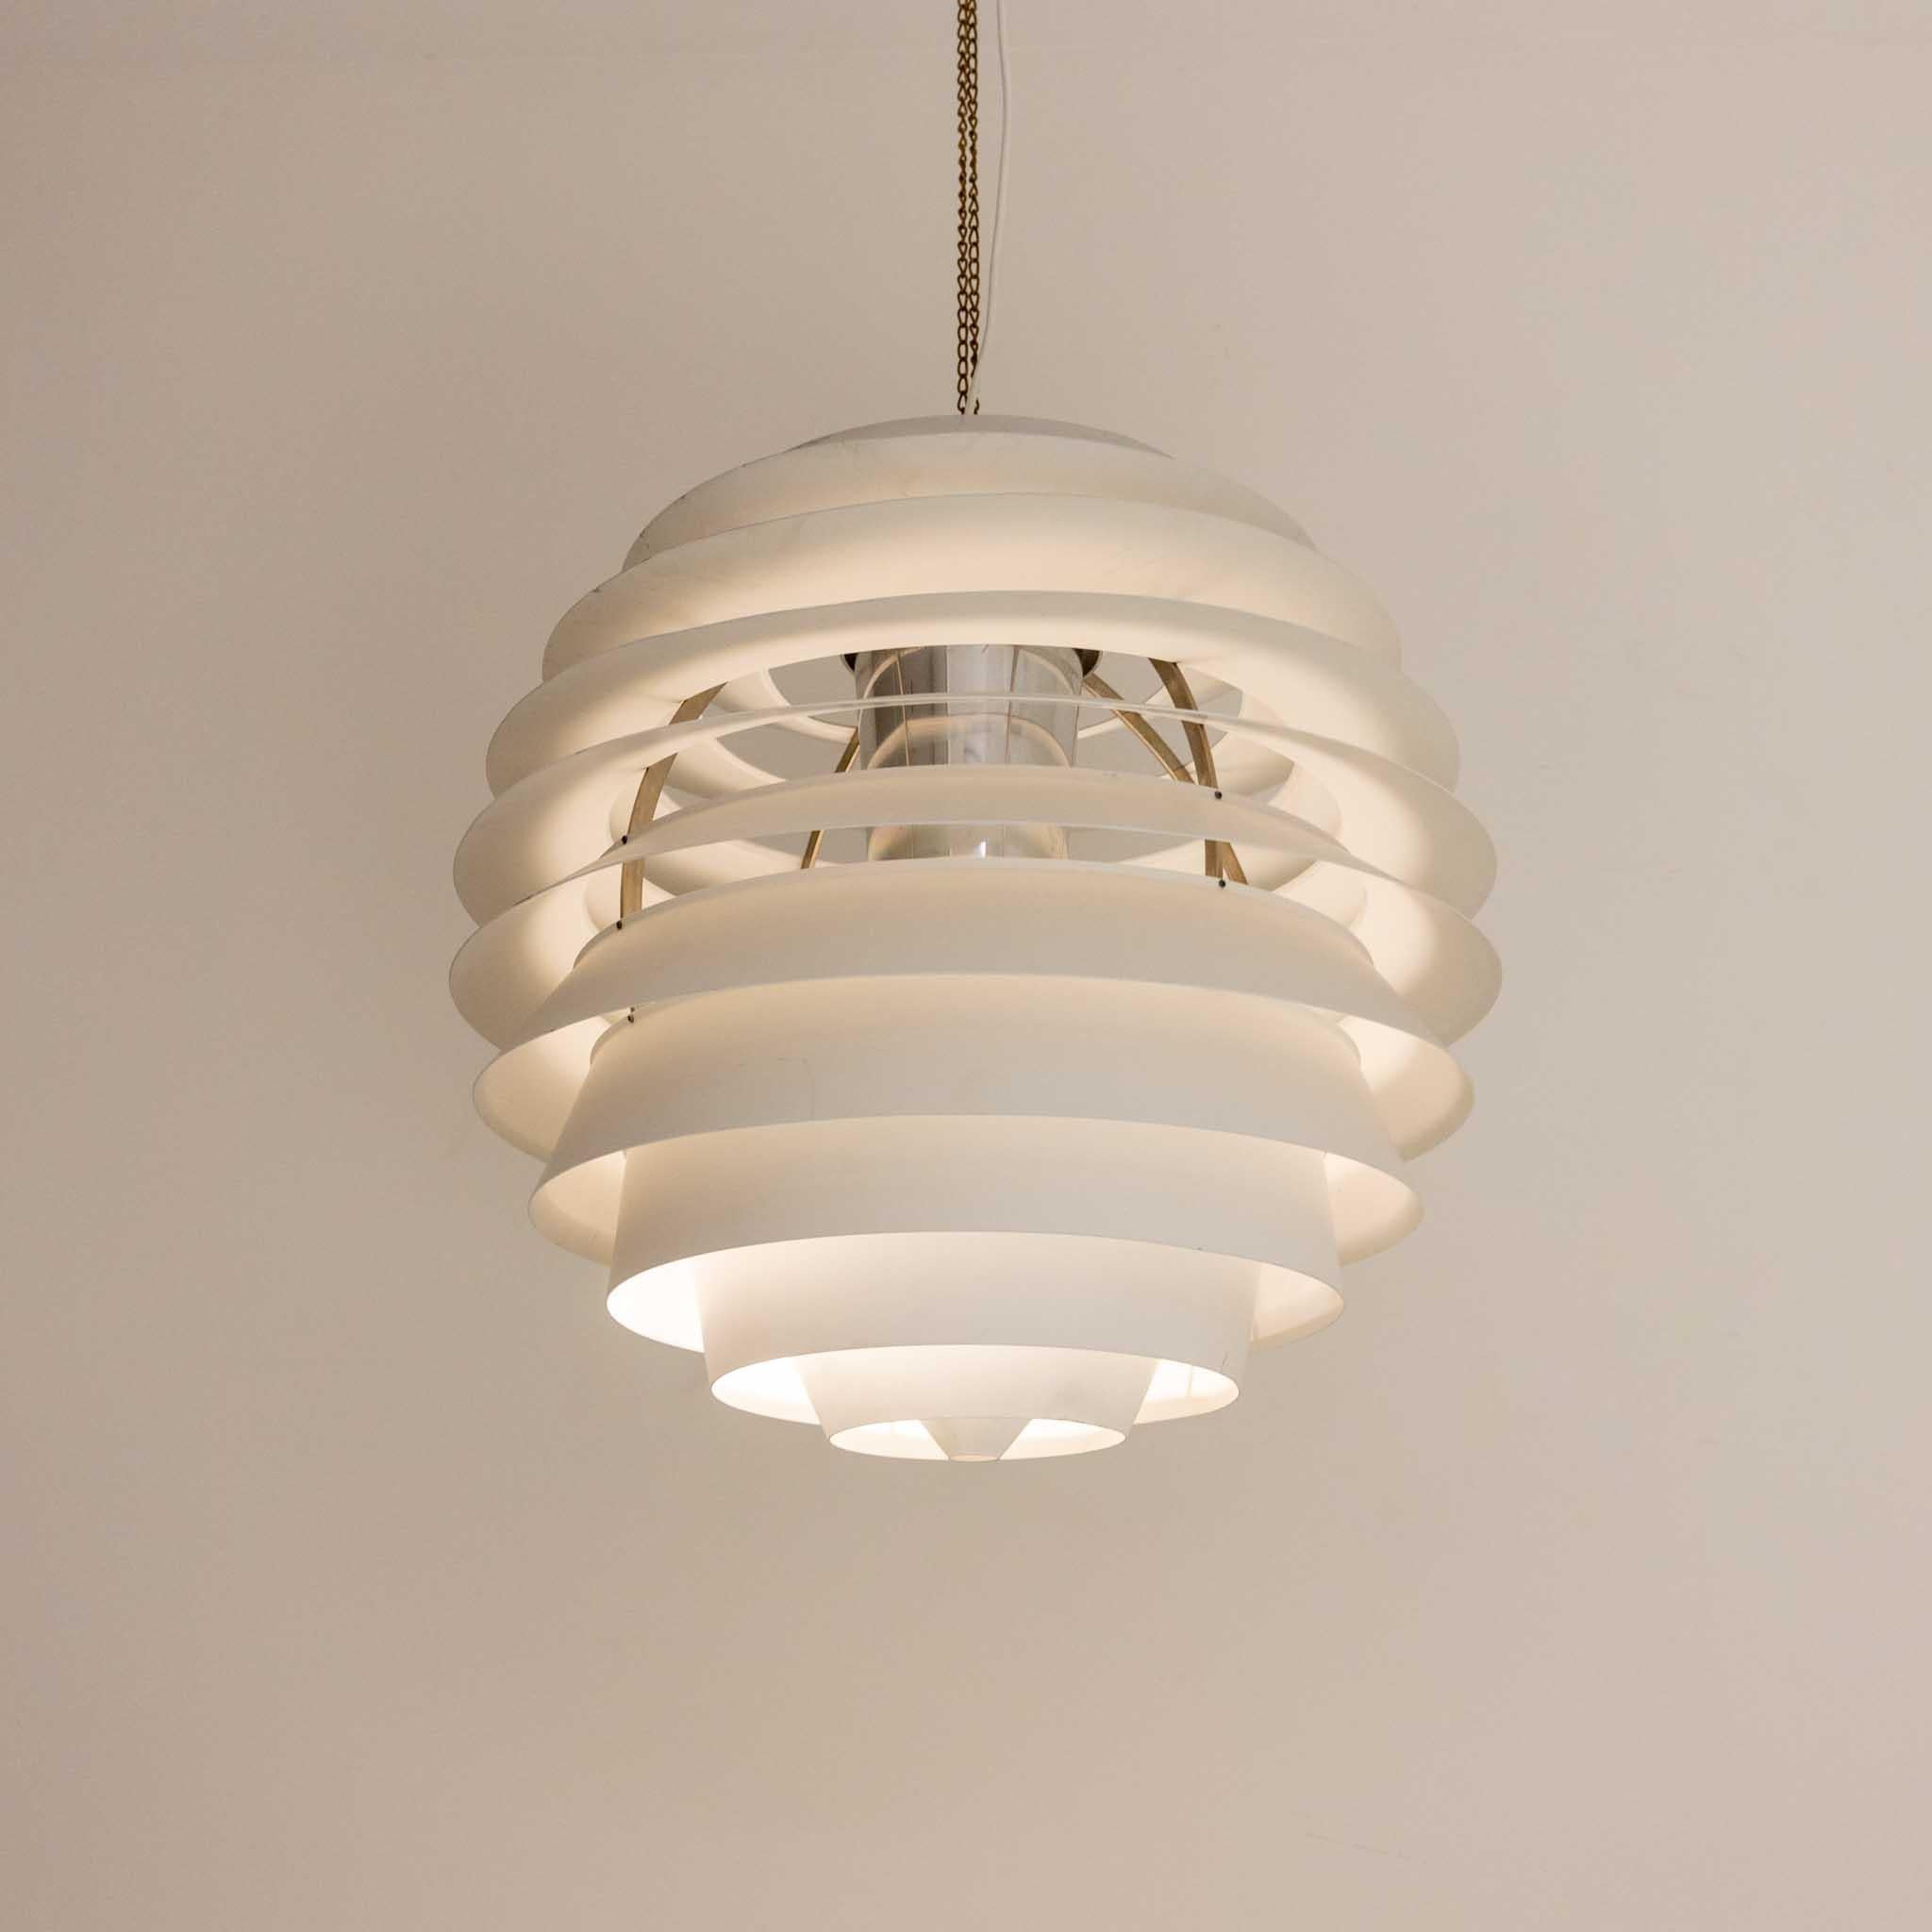 The spherical hanging lamp 